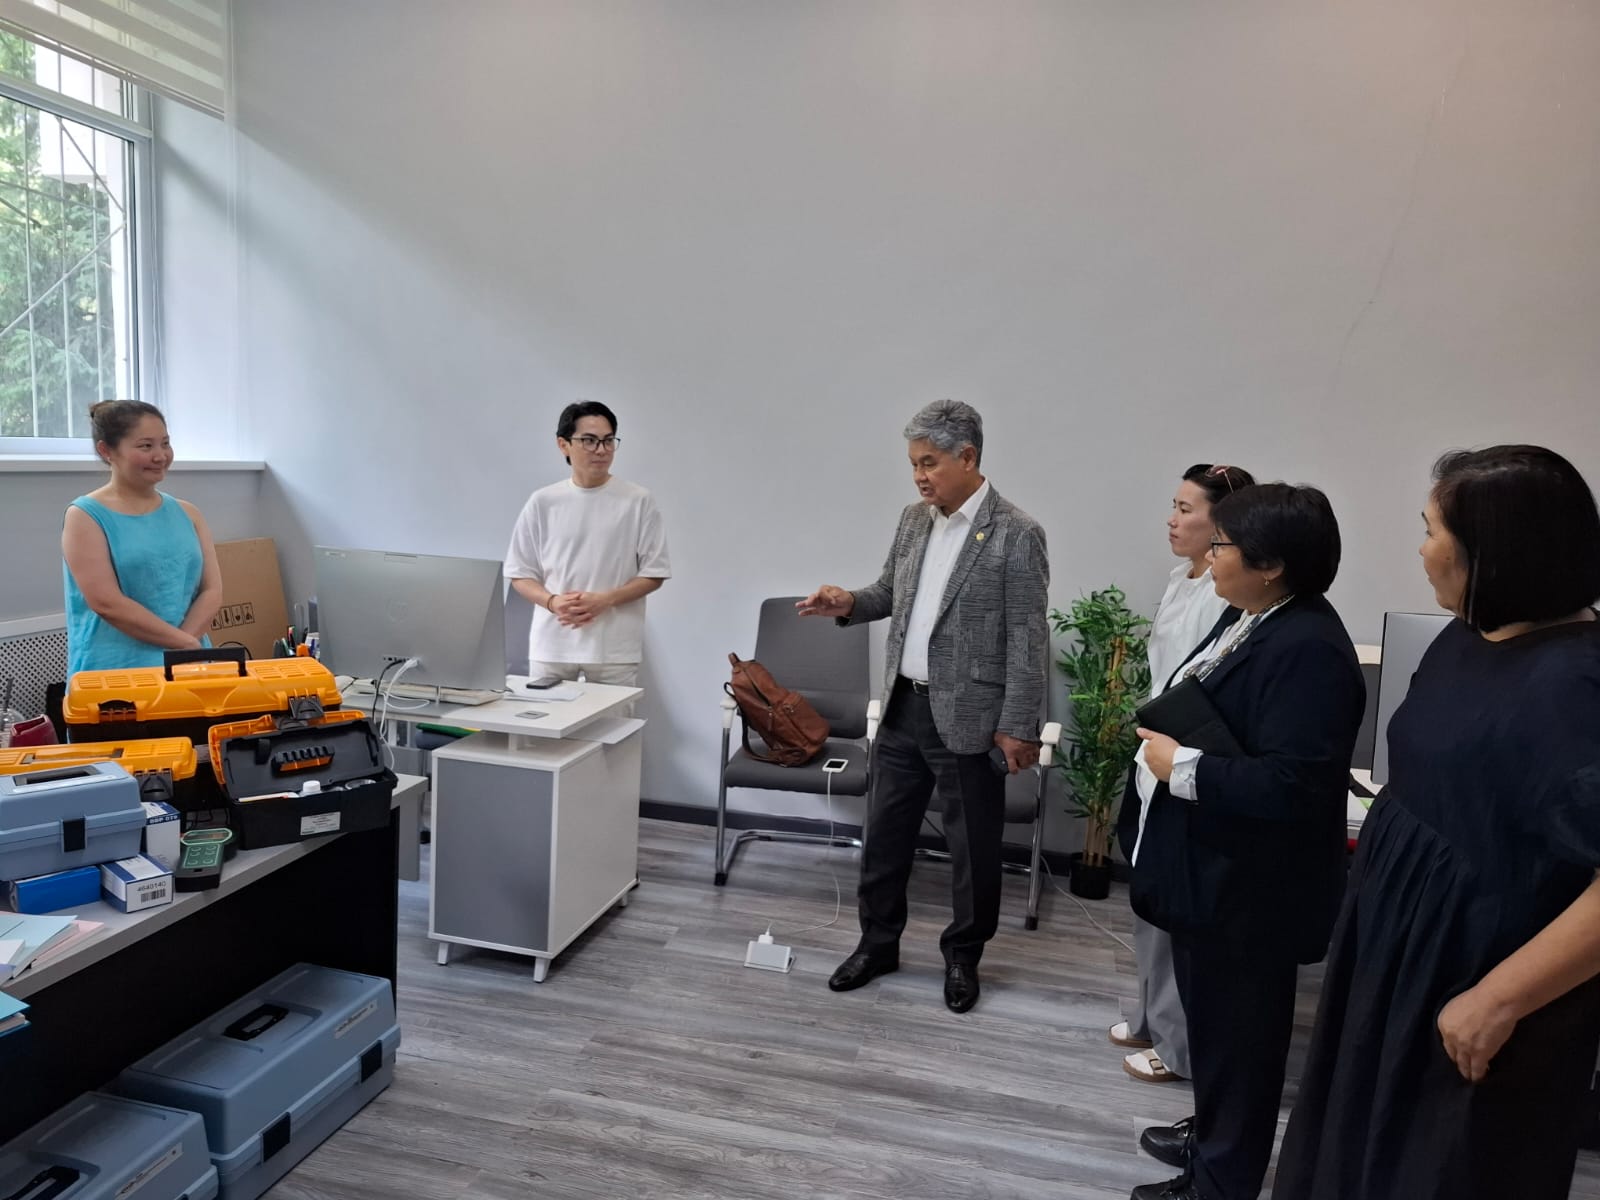 Al-Farabi KazNU strengthens cooperation with research institutes